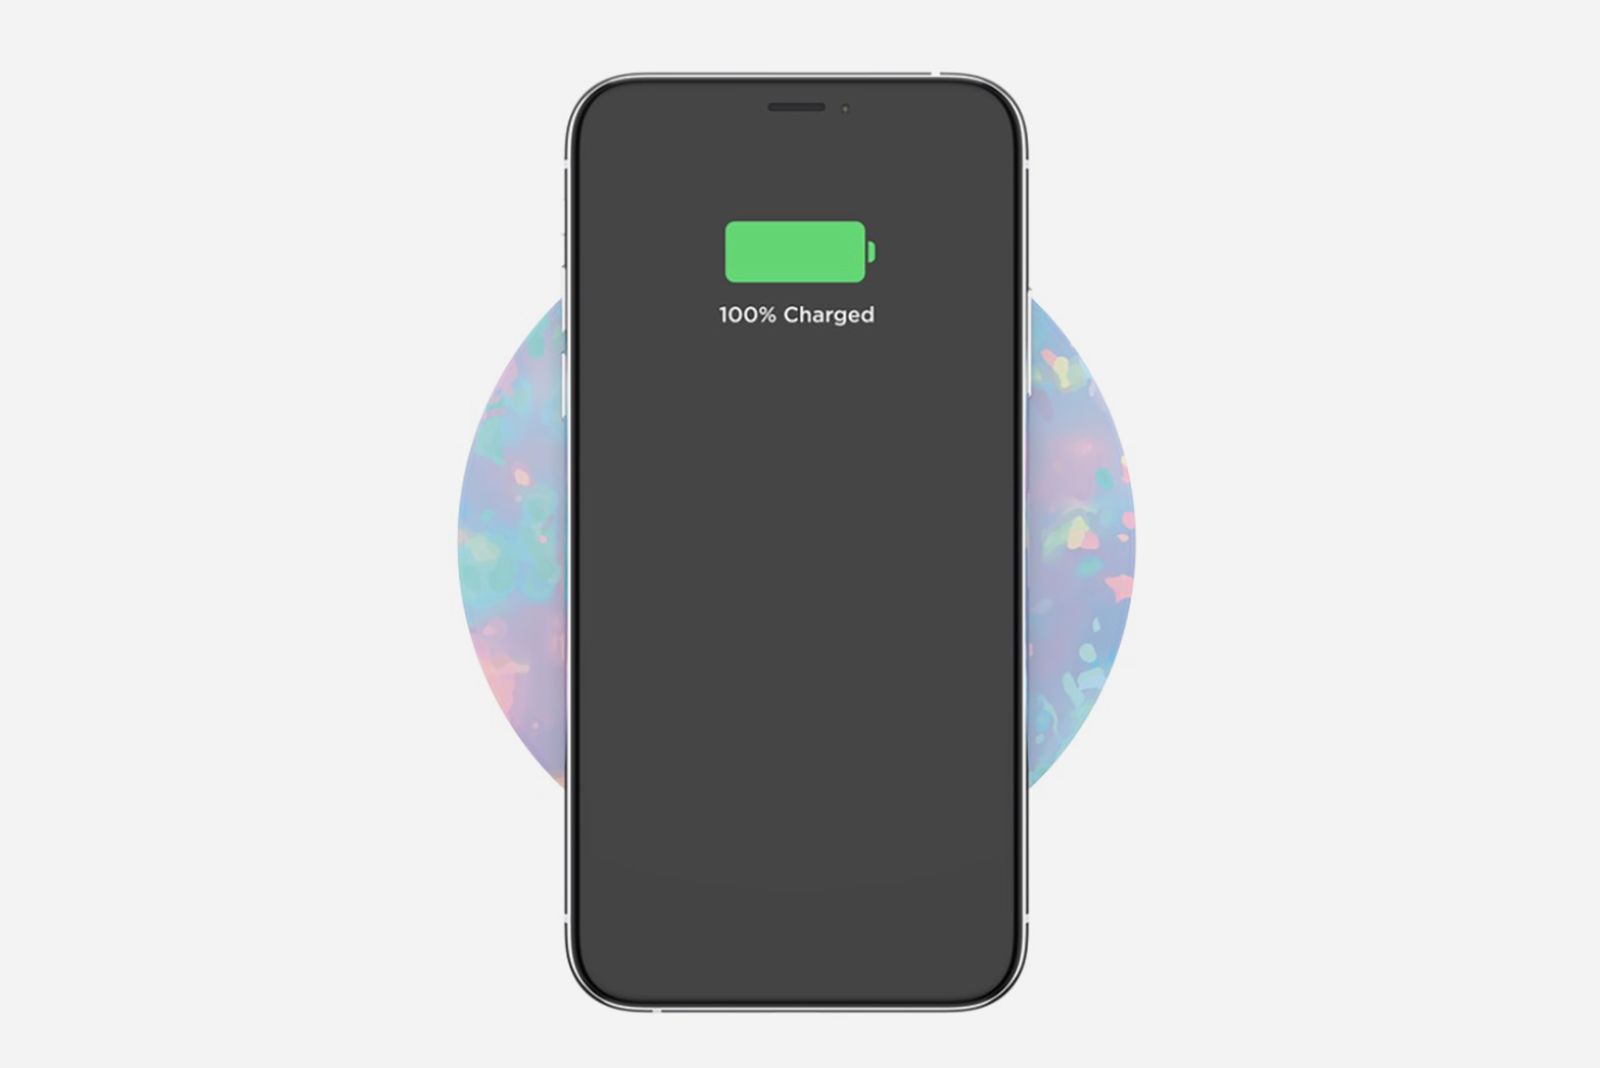 PopSockets' new wireless charger will with your grip